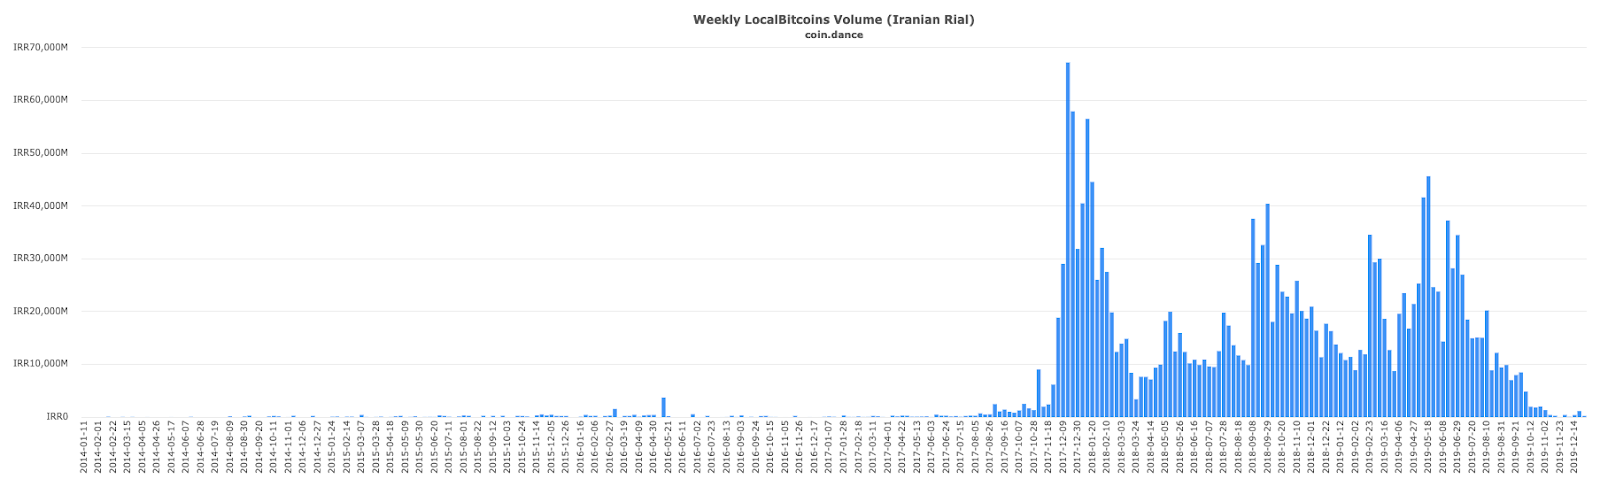 LocalBitcoins weekly trading volume, Iran. Source: Coin.dance